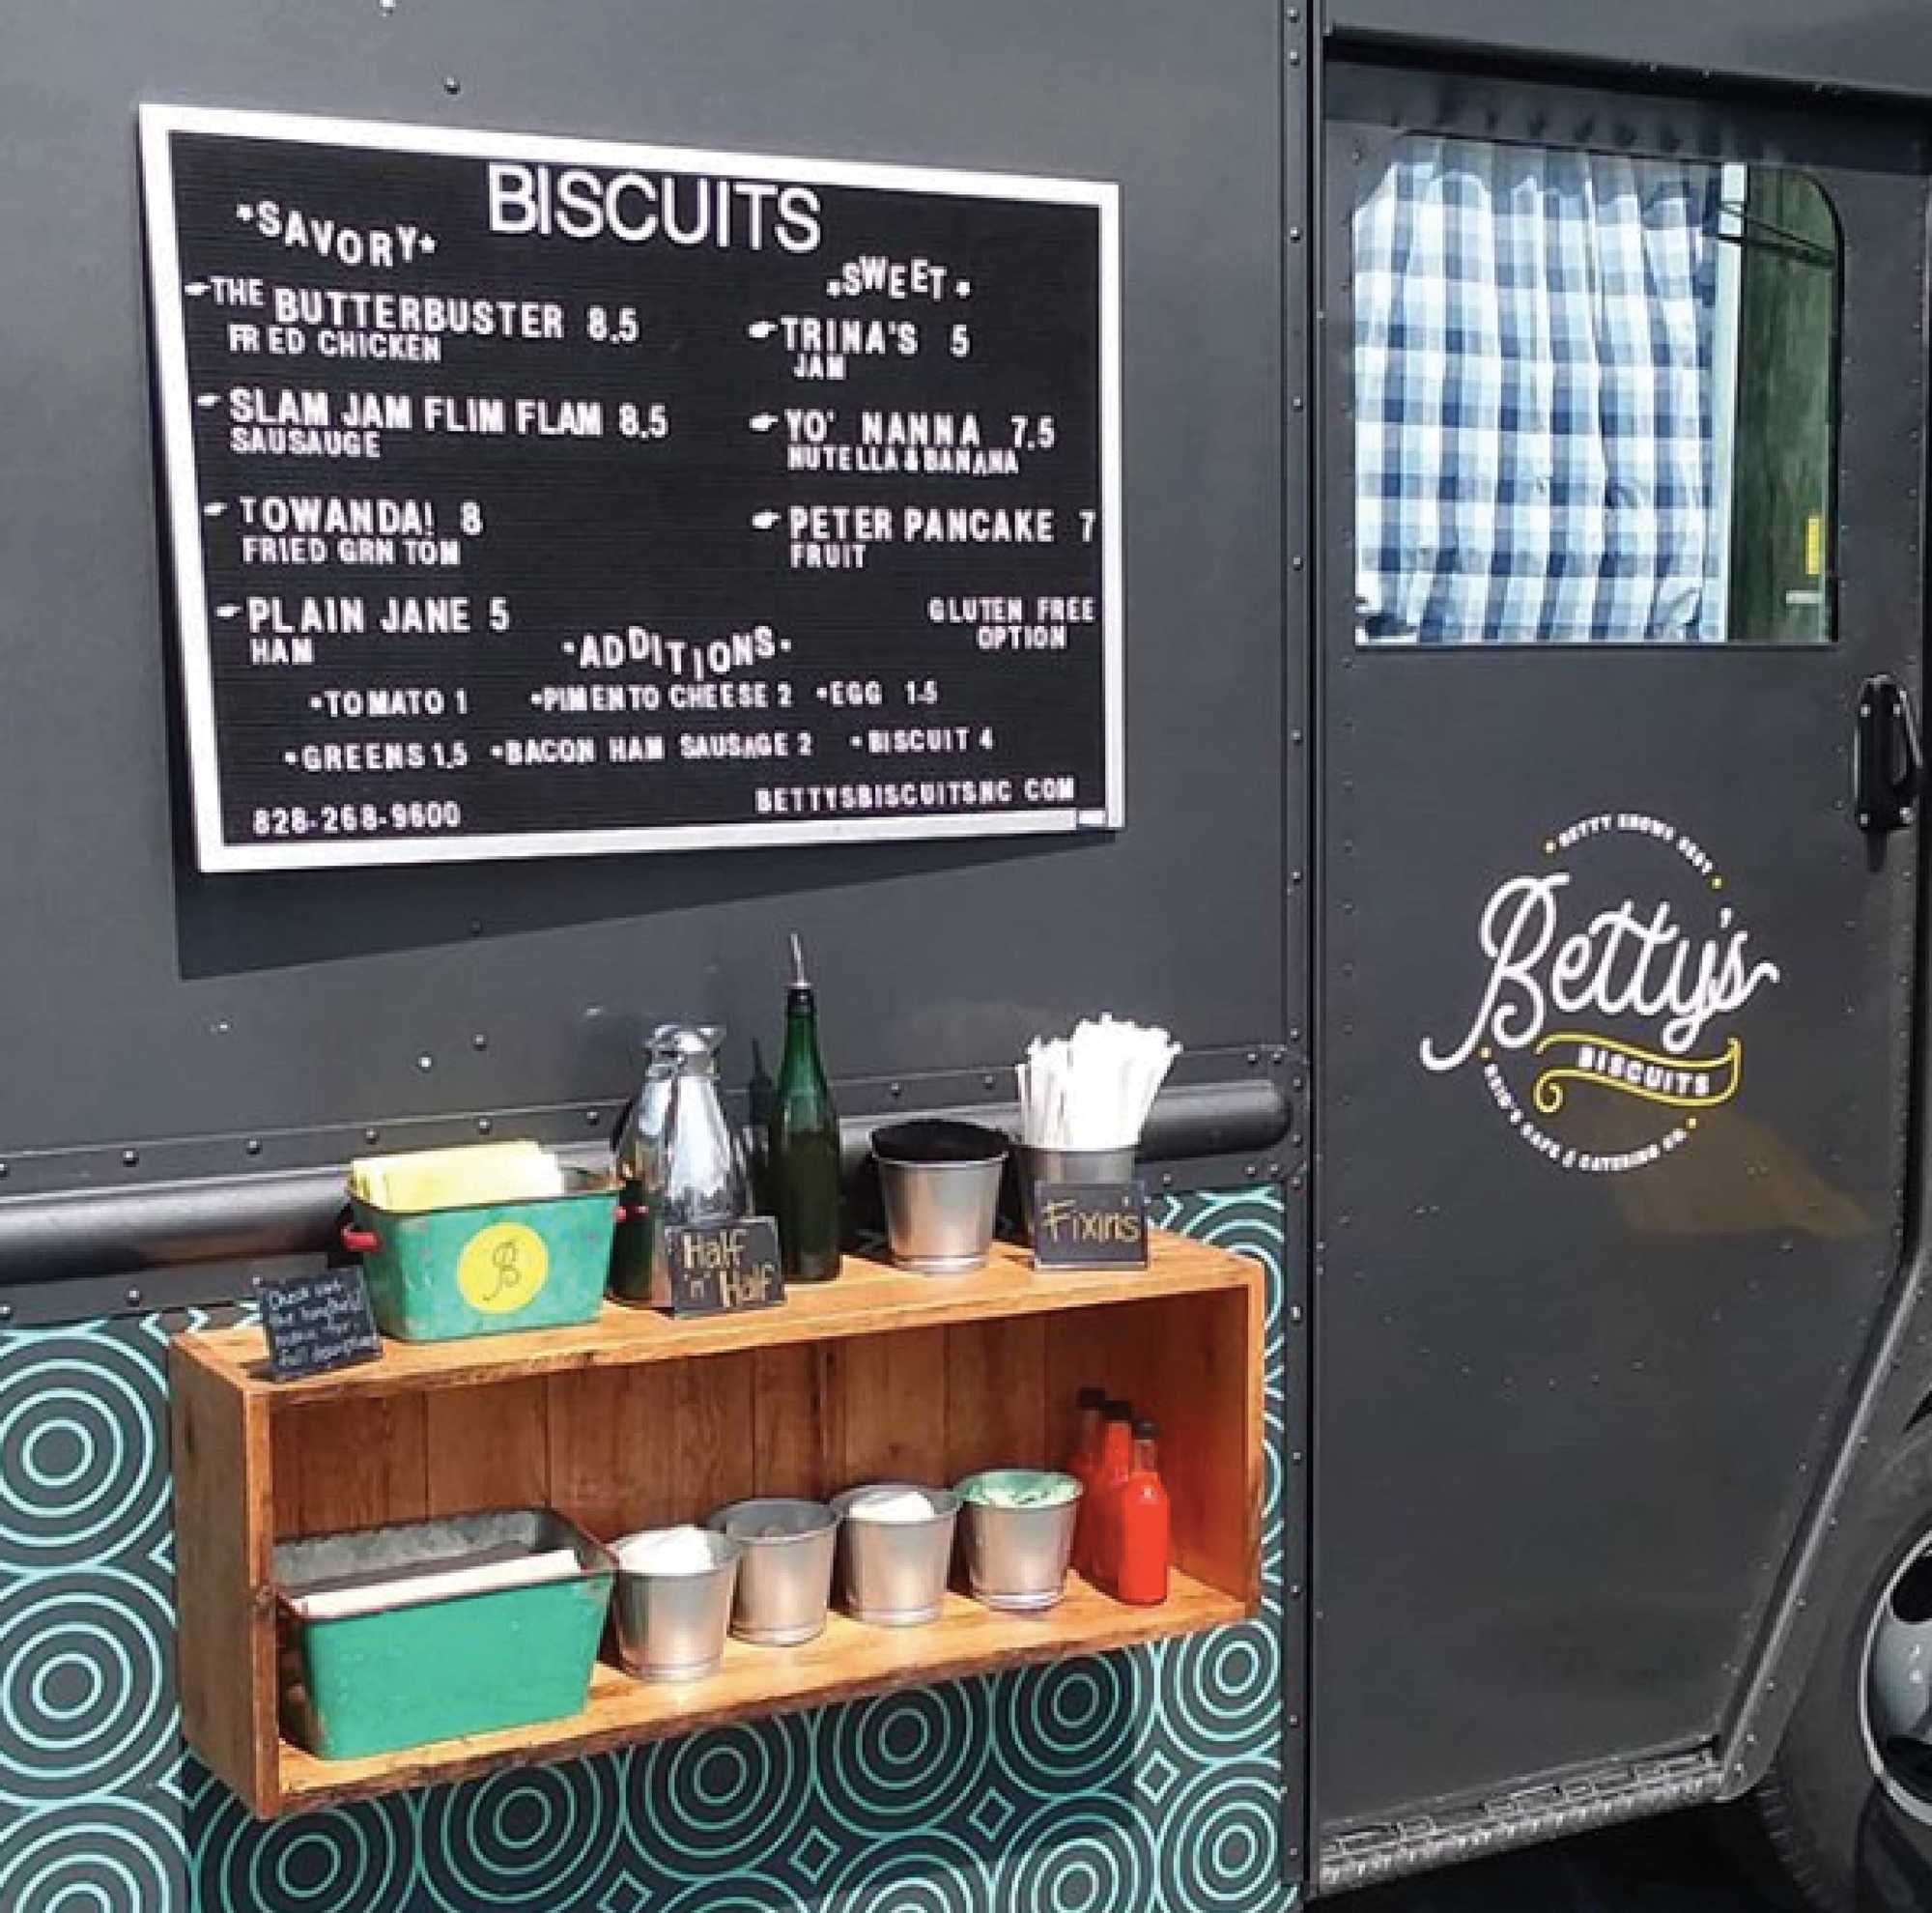 Bettys Biscuits menu displayed on the side of their food truck. Bettys offers savory and sweet biscuits.